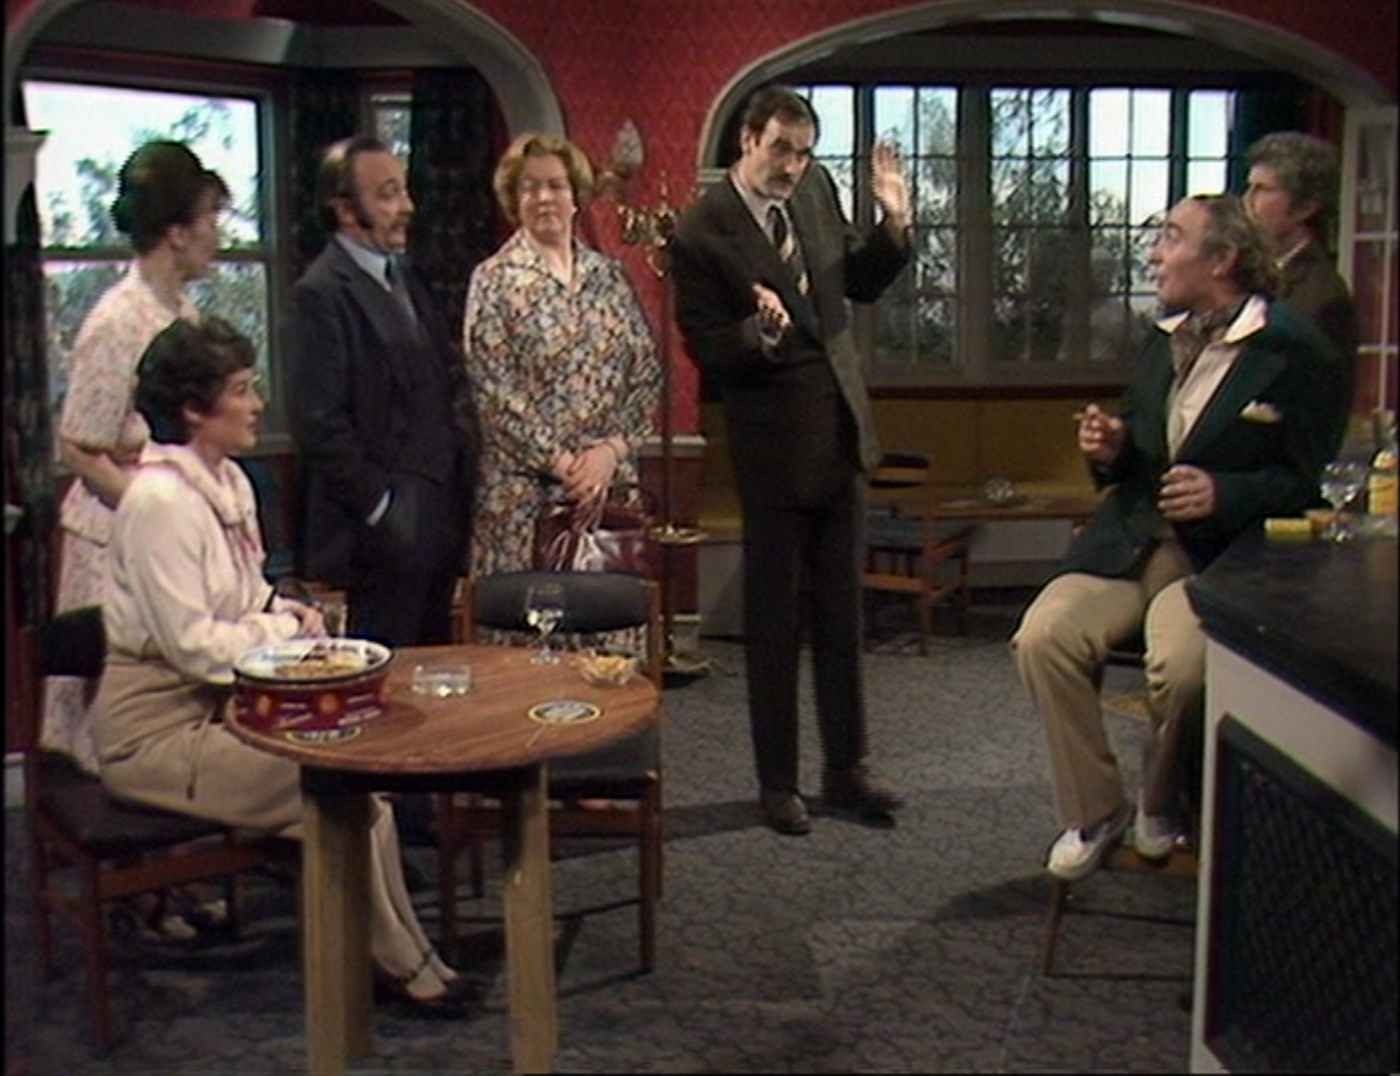 basil_anniversary_fawlty_towers.png